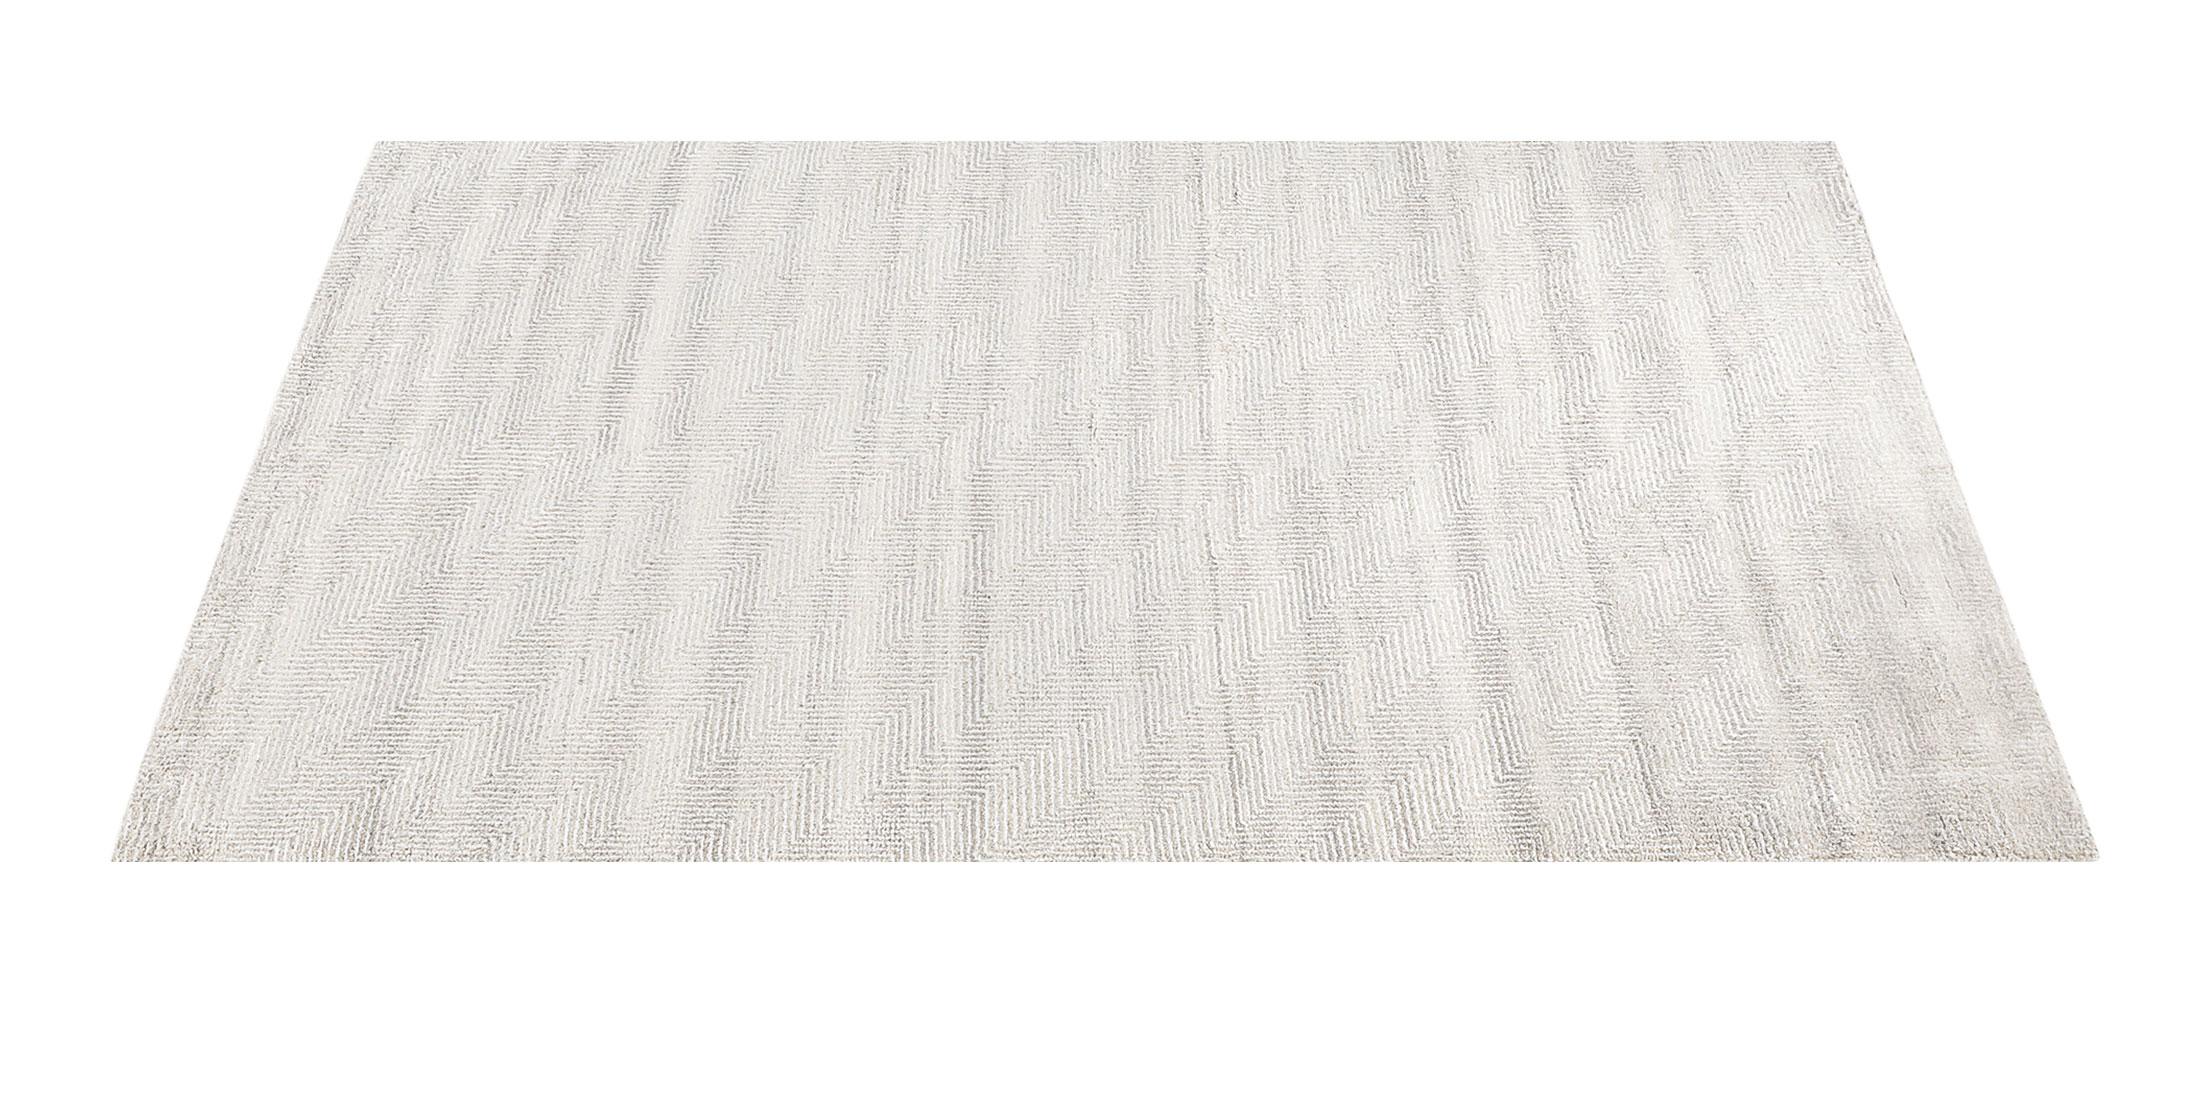 For Sale: Beige (Sand) Ben Soleimani Vello Rug– Hand-knotted Wool + Viscose Ash/Silver 6'x9' 2